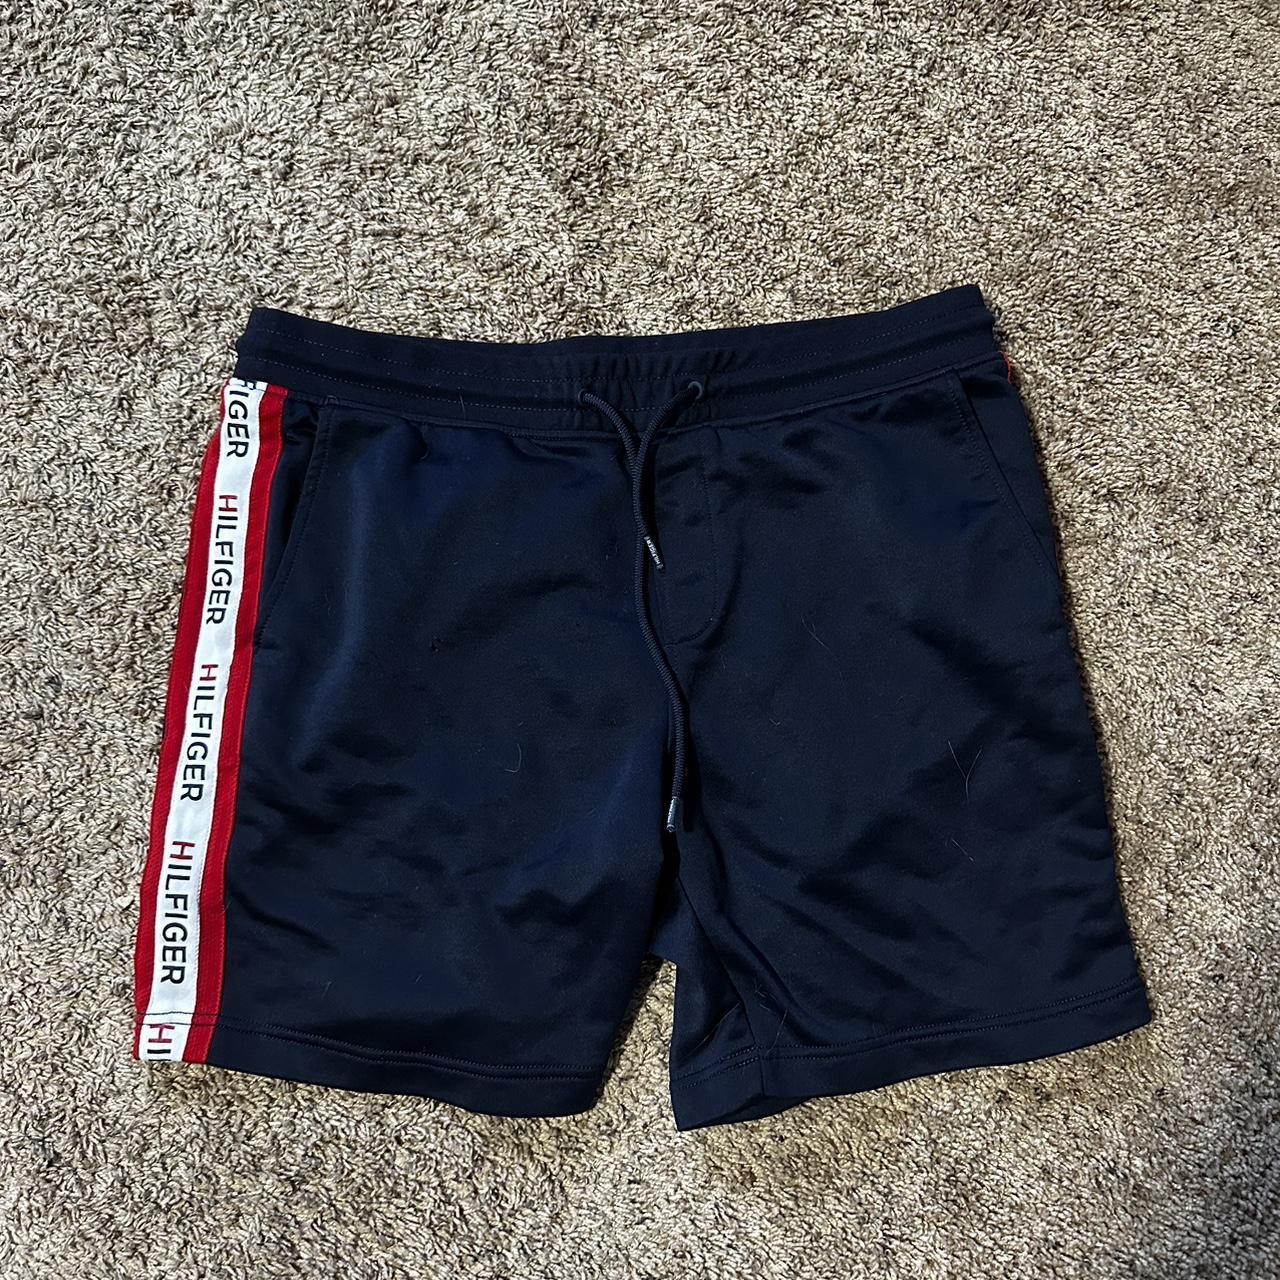 Tommy Basketball Shorts Tagged L great above the... - Depop